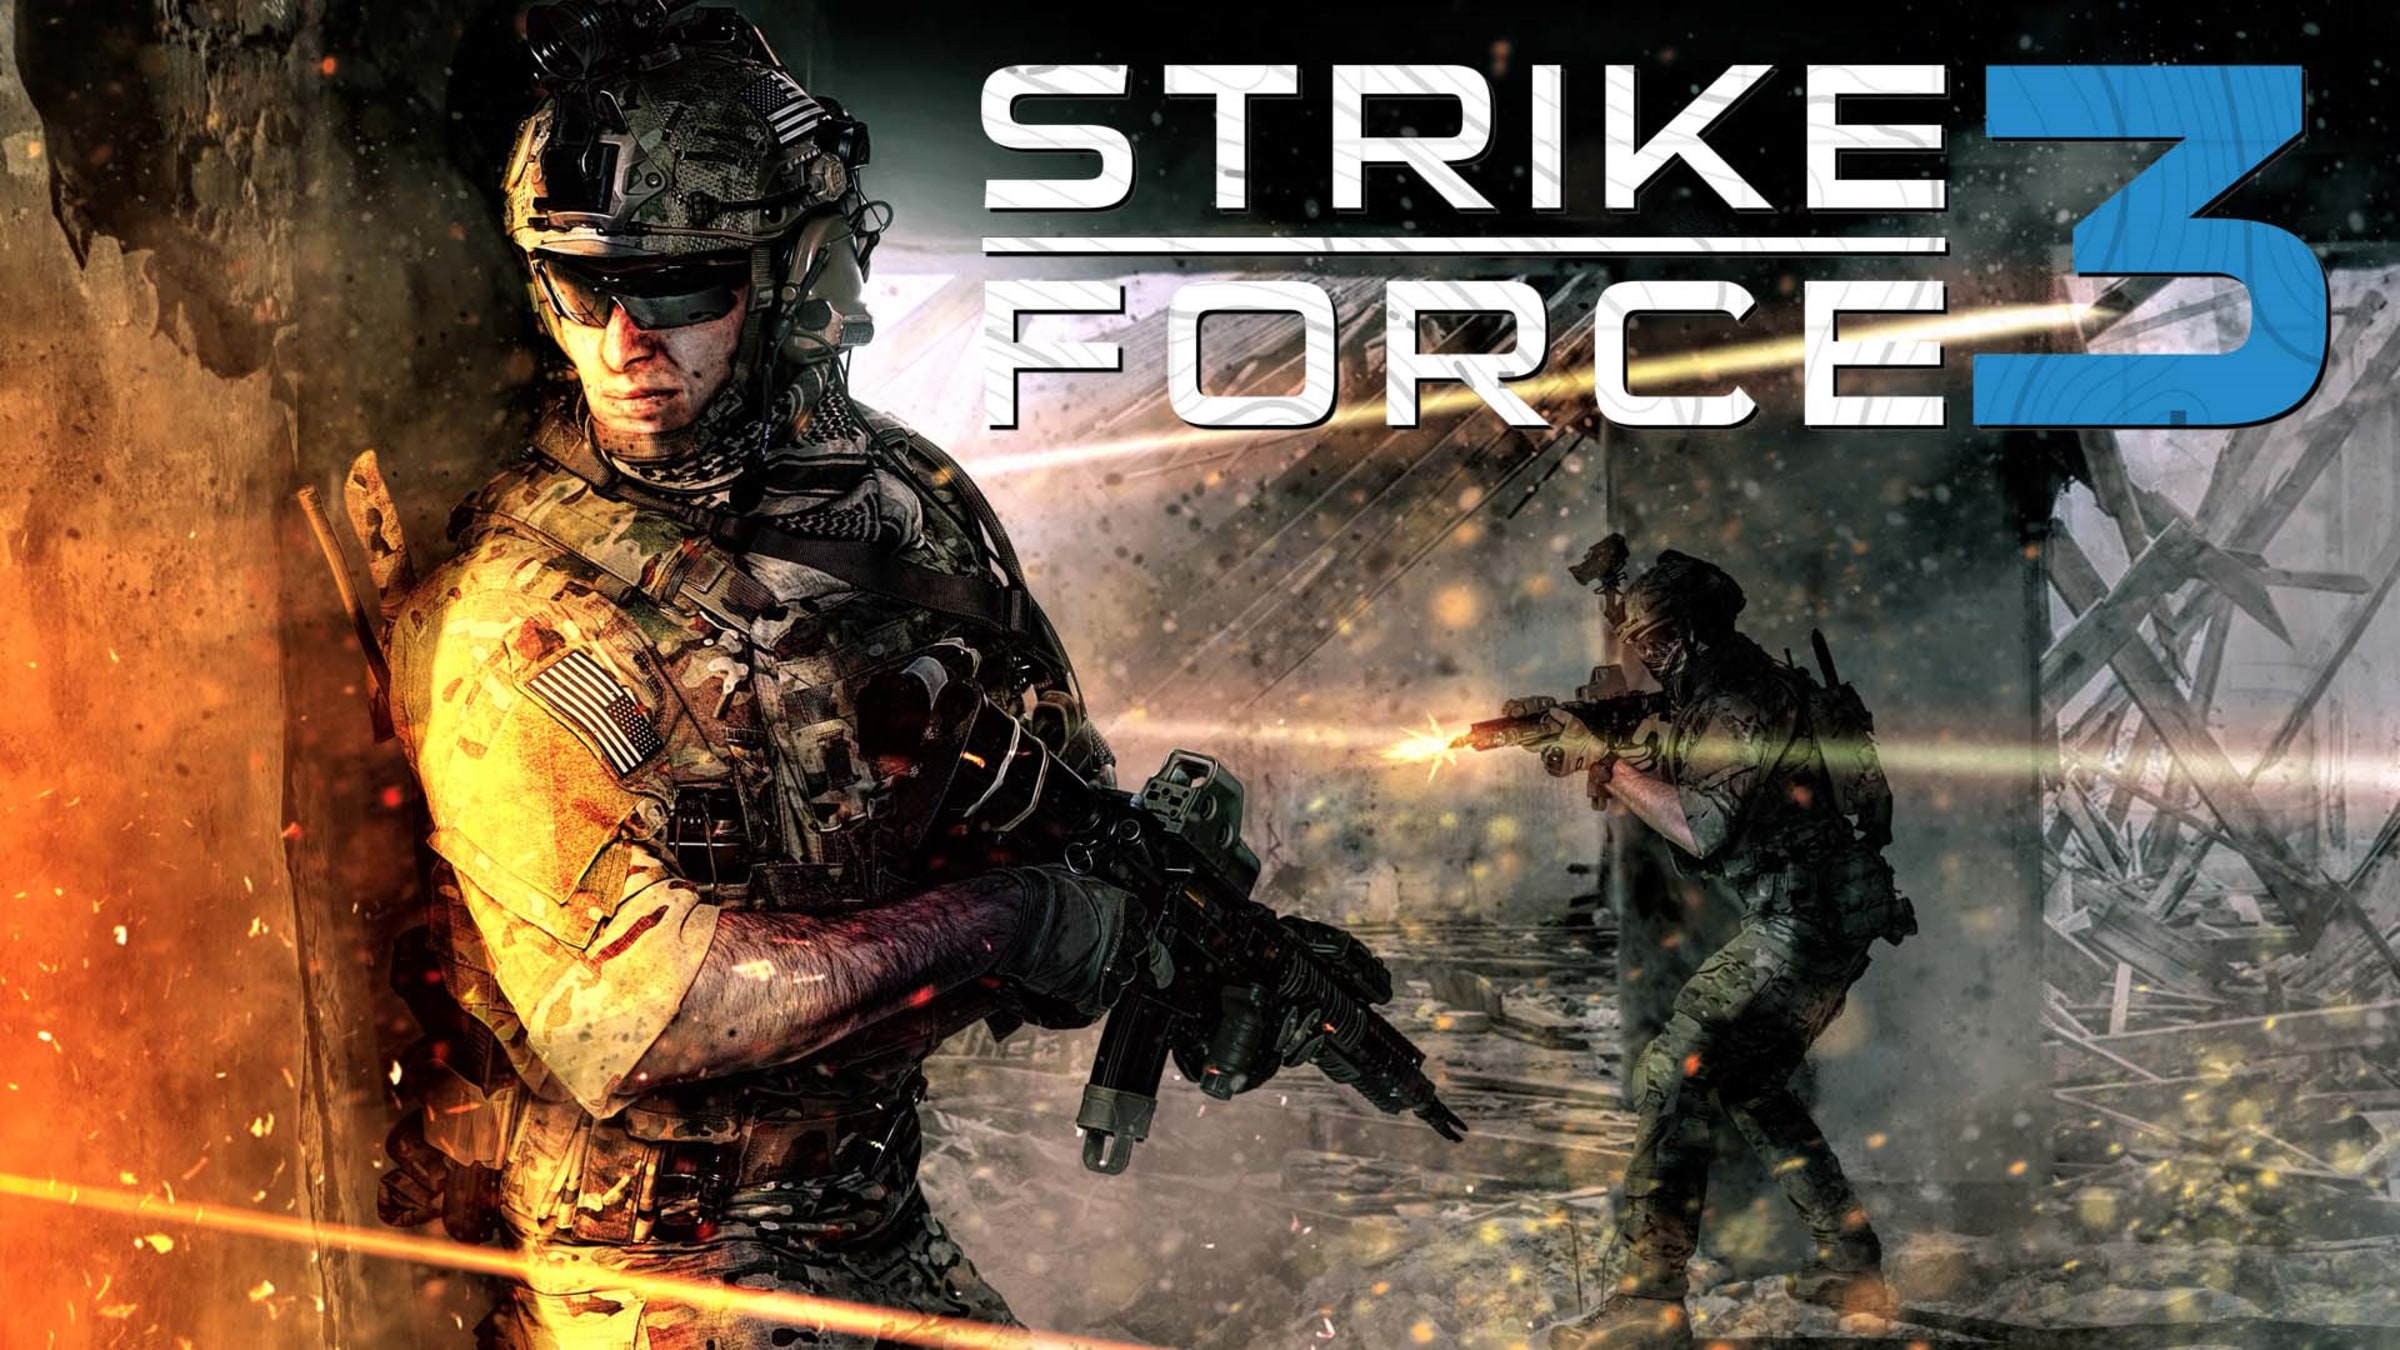 Strike Force 3 for Nintendo Switch